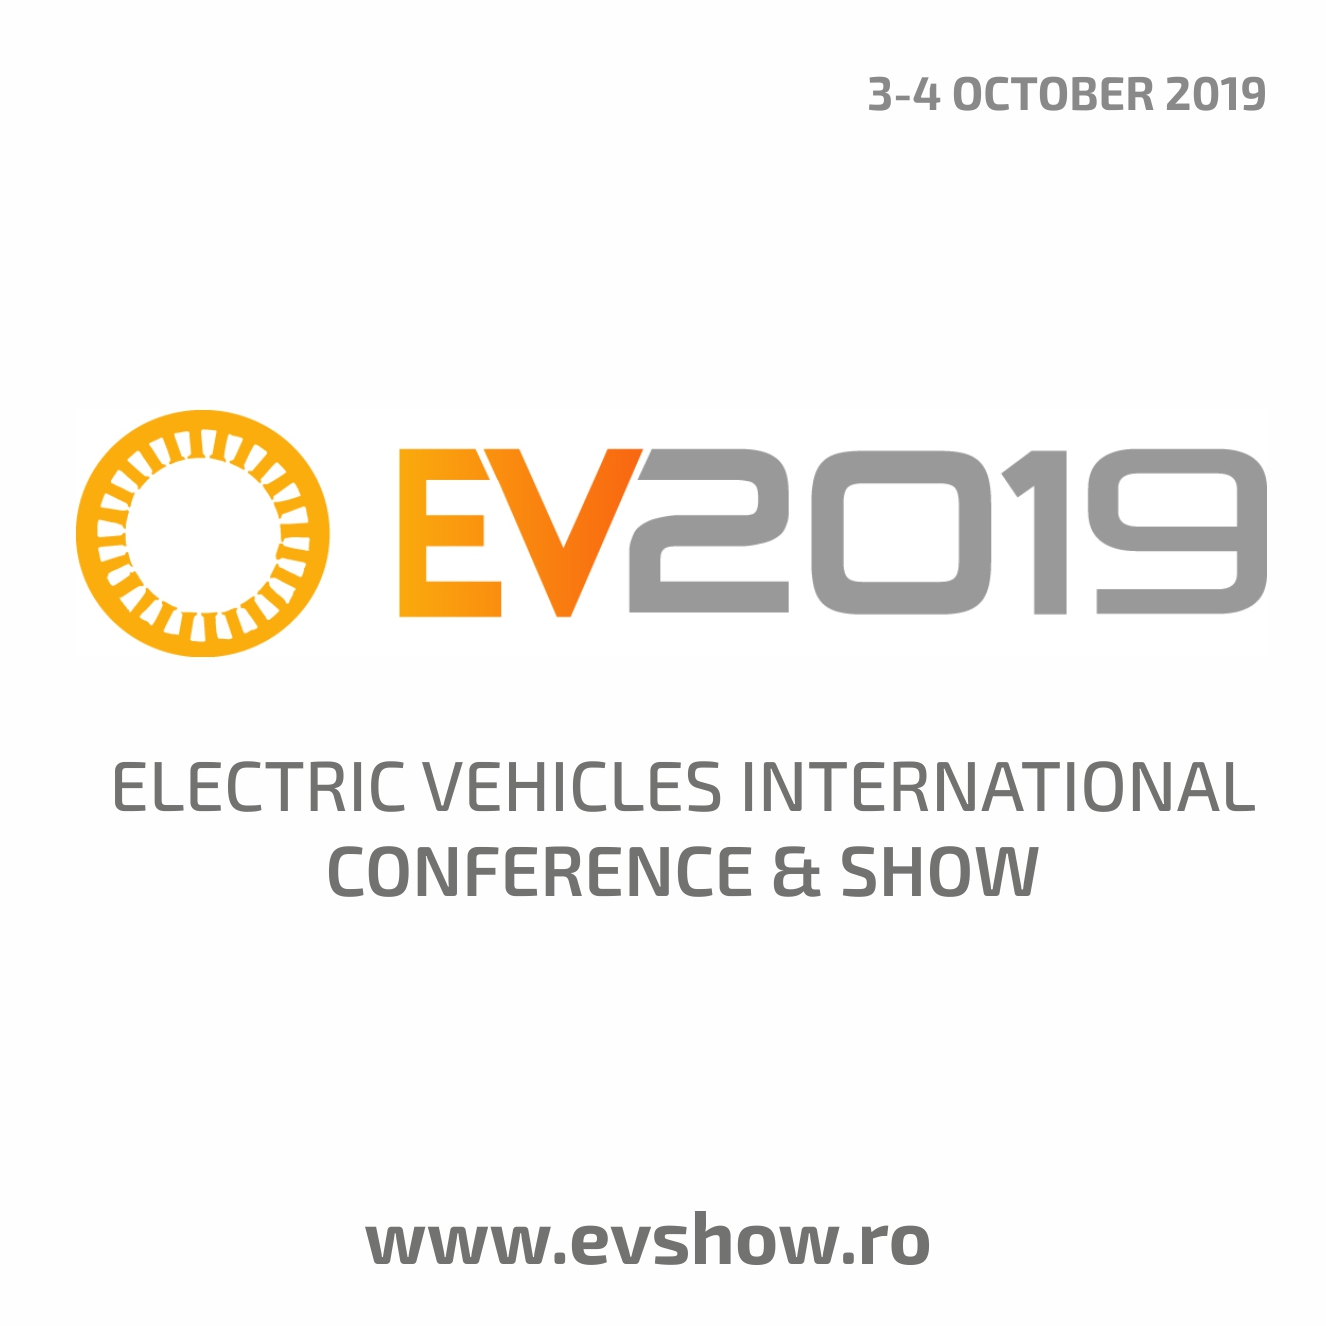 EV2019 Electric Vehicles International Conference & Show